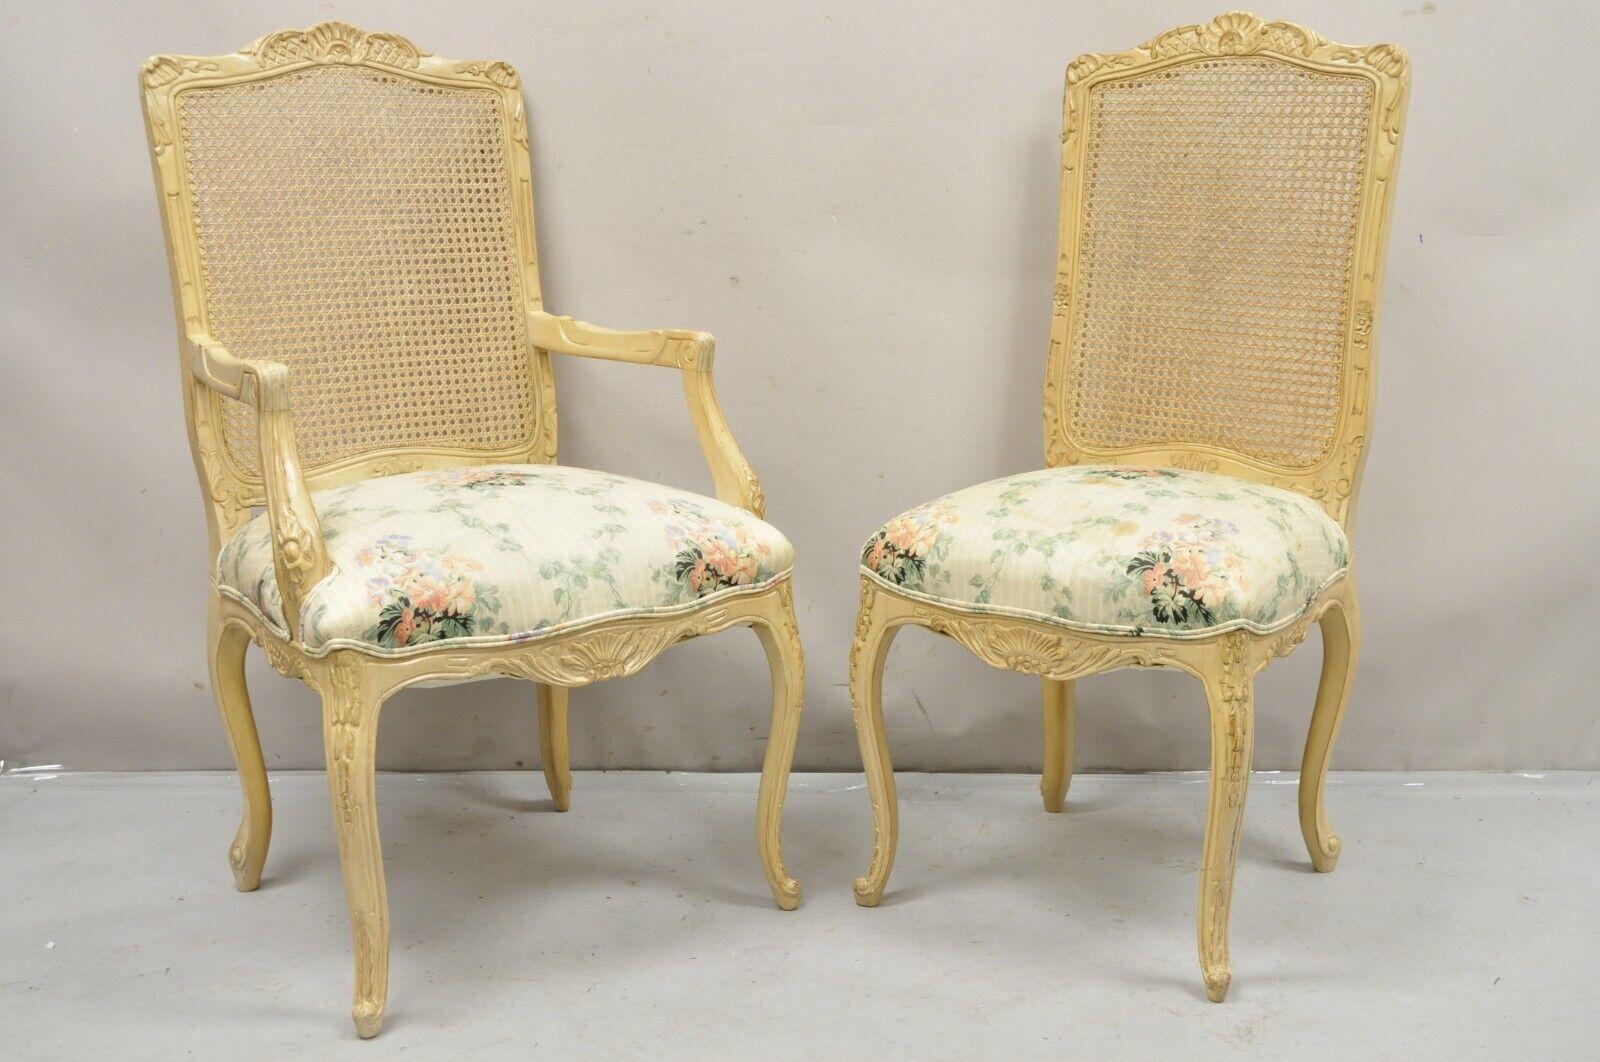 Vintage French Louis XV Provincial Style Cane Back Cream Dining Chairs- Set of 6. Item features (2) Armchairs, (4) side chairs, distressed white washed beige finish, cane backs, nicely carved frames, very nice vintage set. Circa Mid to Late 20th